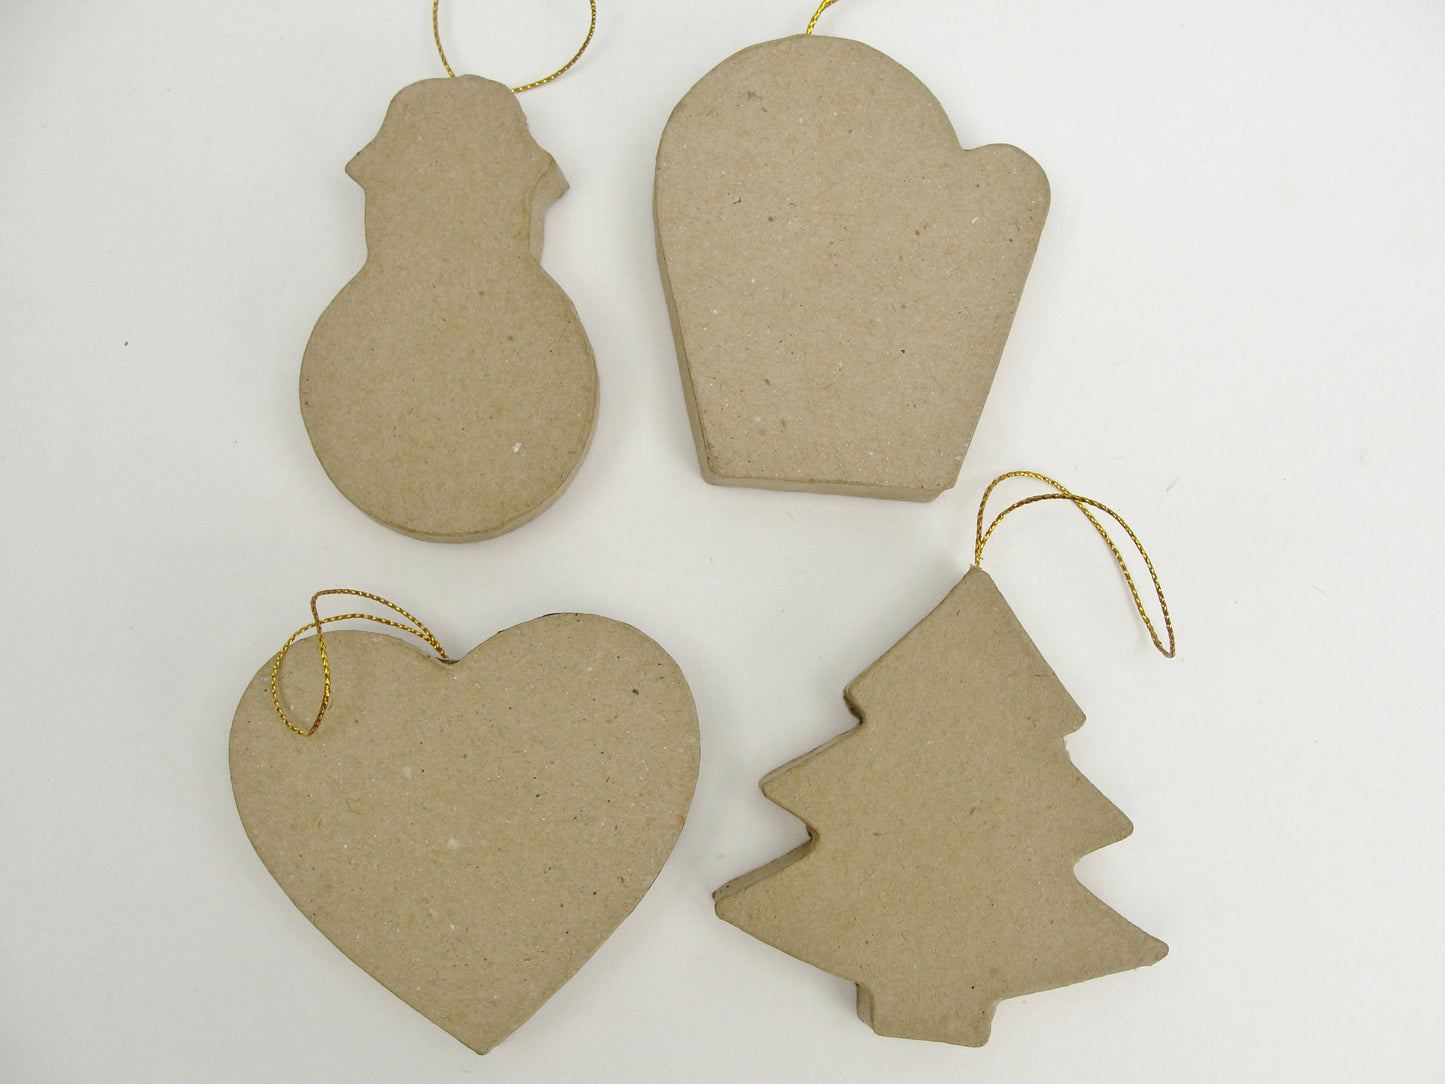 Paper mache ornament shapes ready to decorate set of 12 - Paper Mache - Craft Supply House